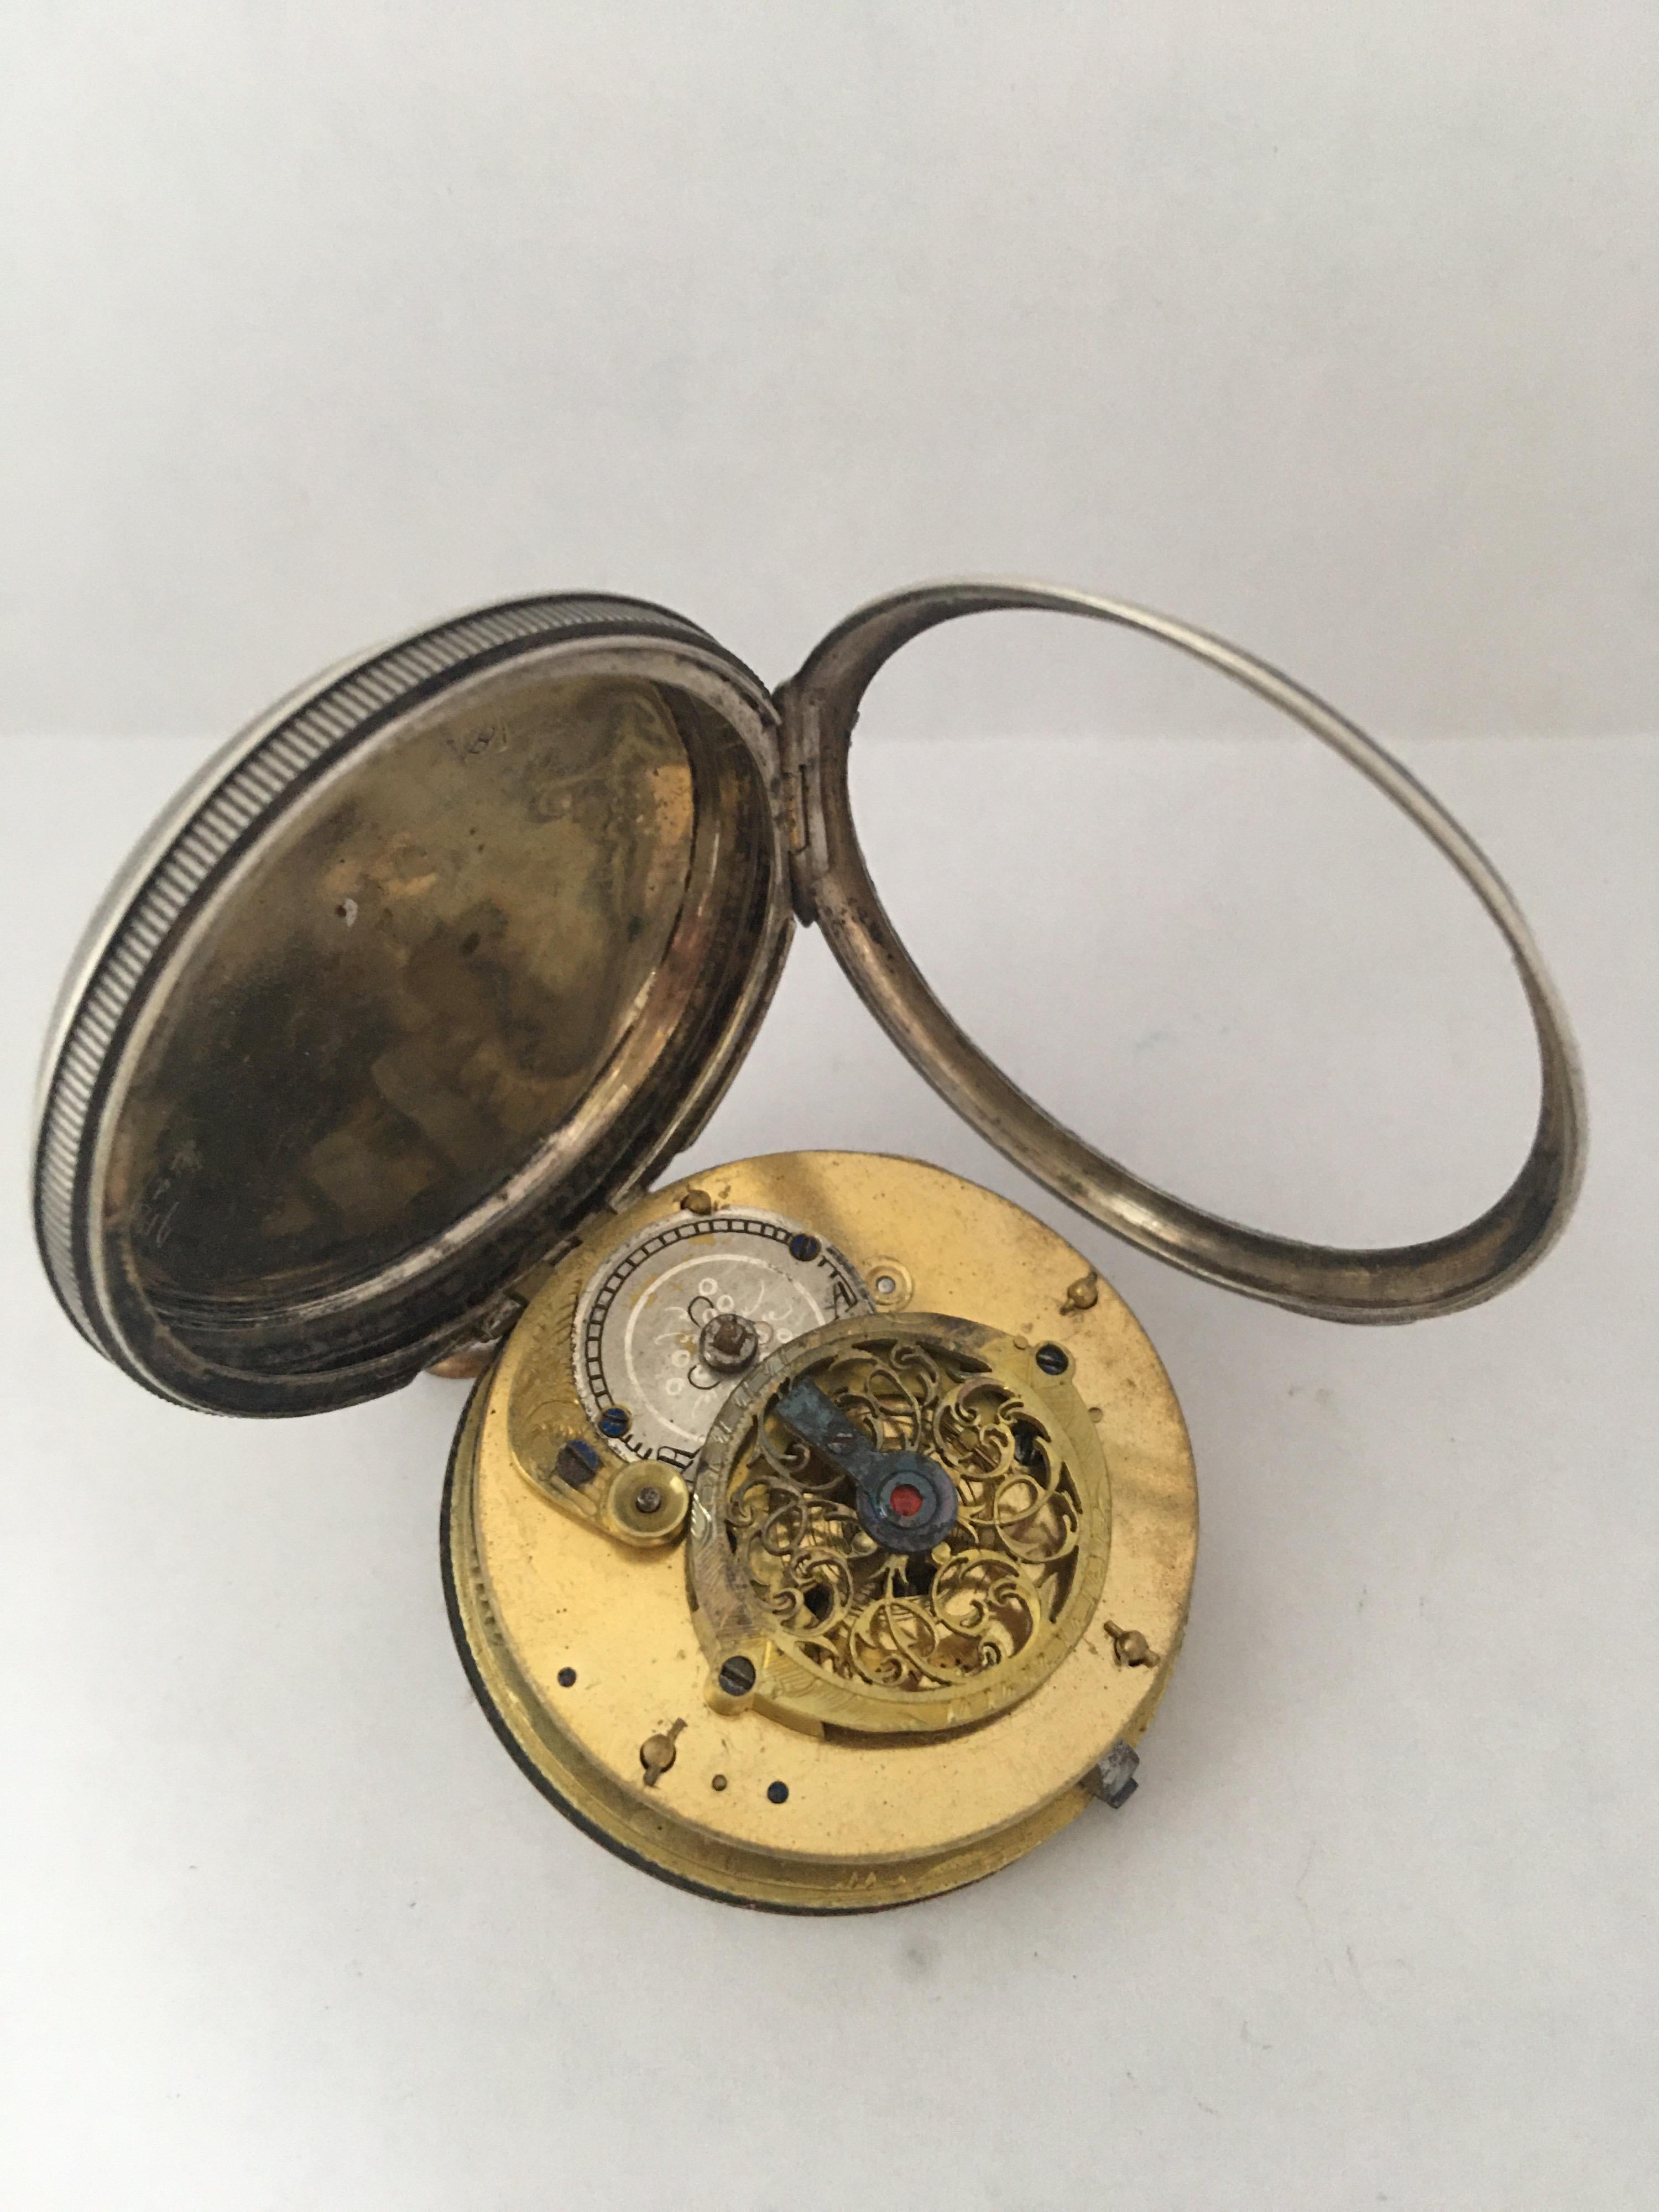 Early Rare Verge Fusee Silver Pocket Watch For Sale 1